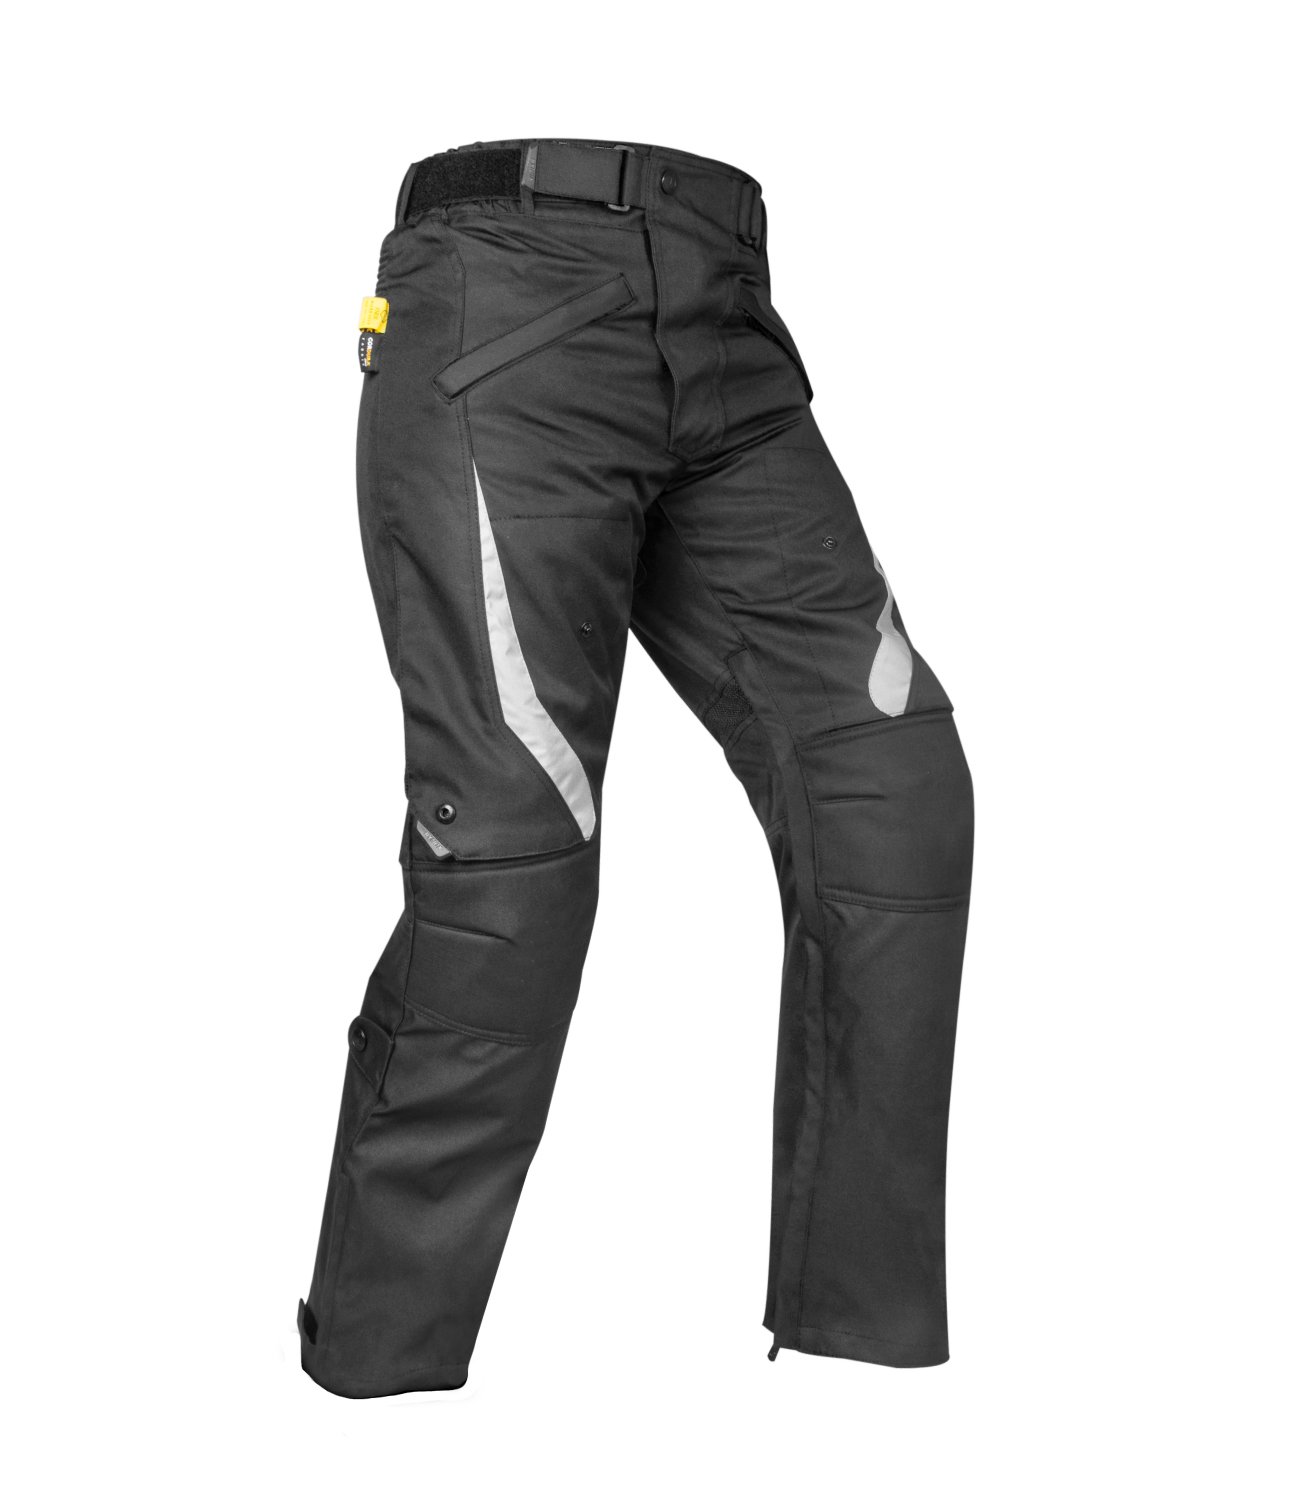 horse riding pants-quality supplier of riding| Alibaba.com